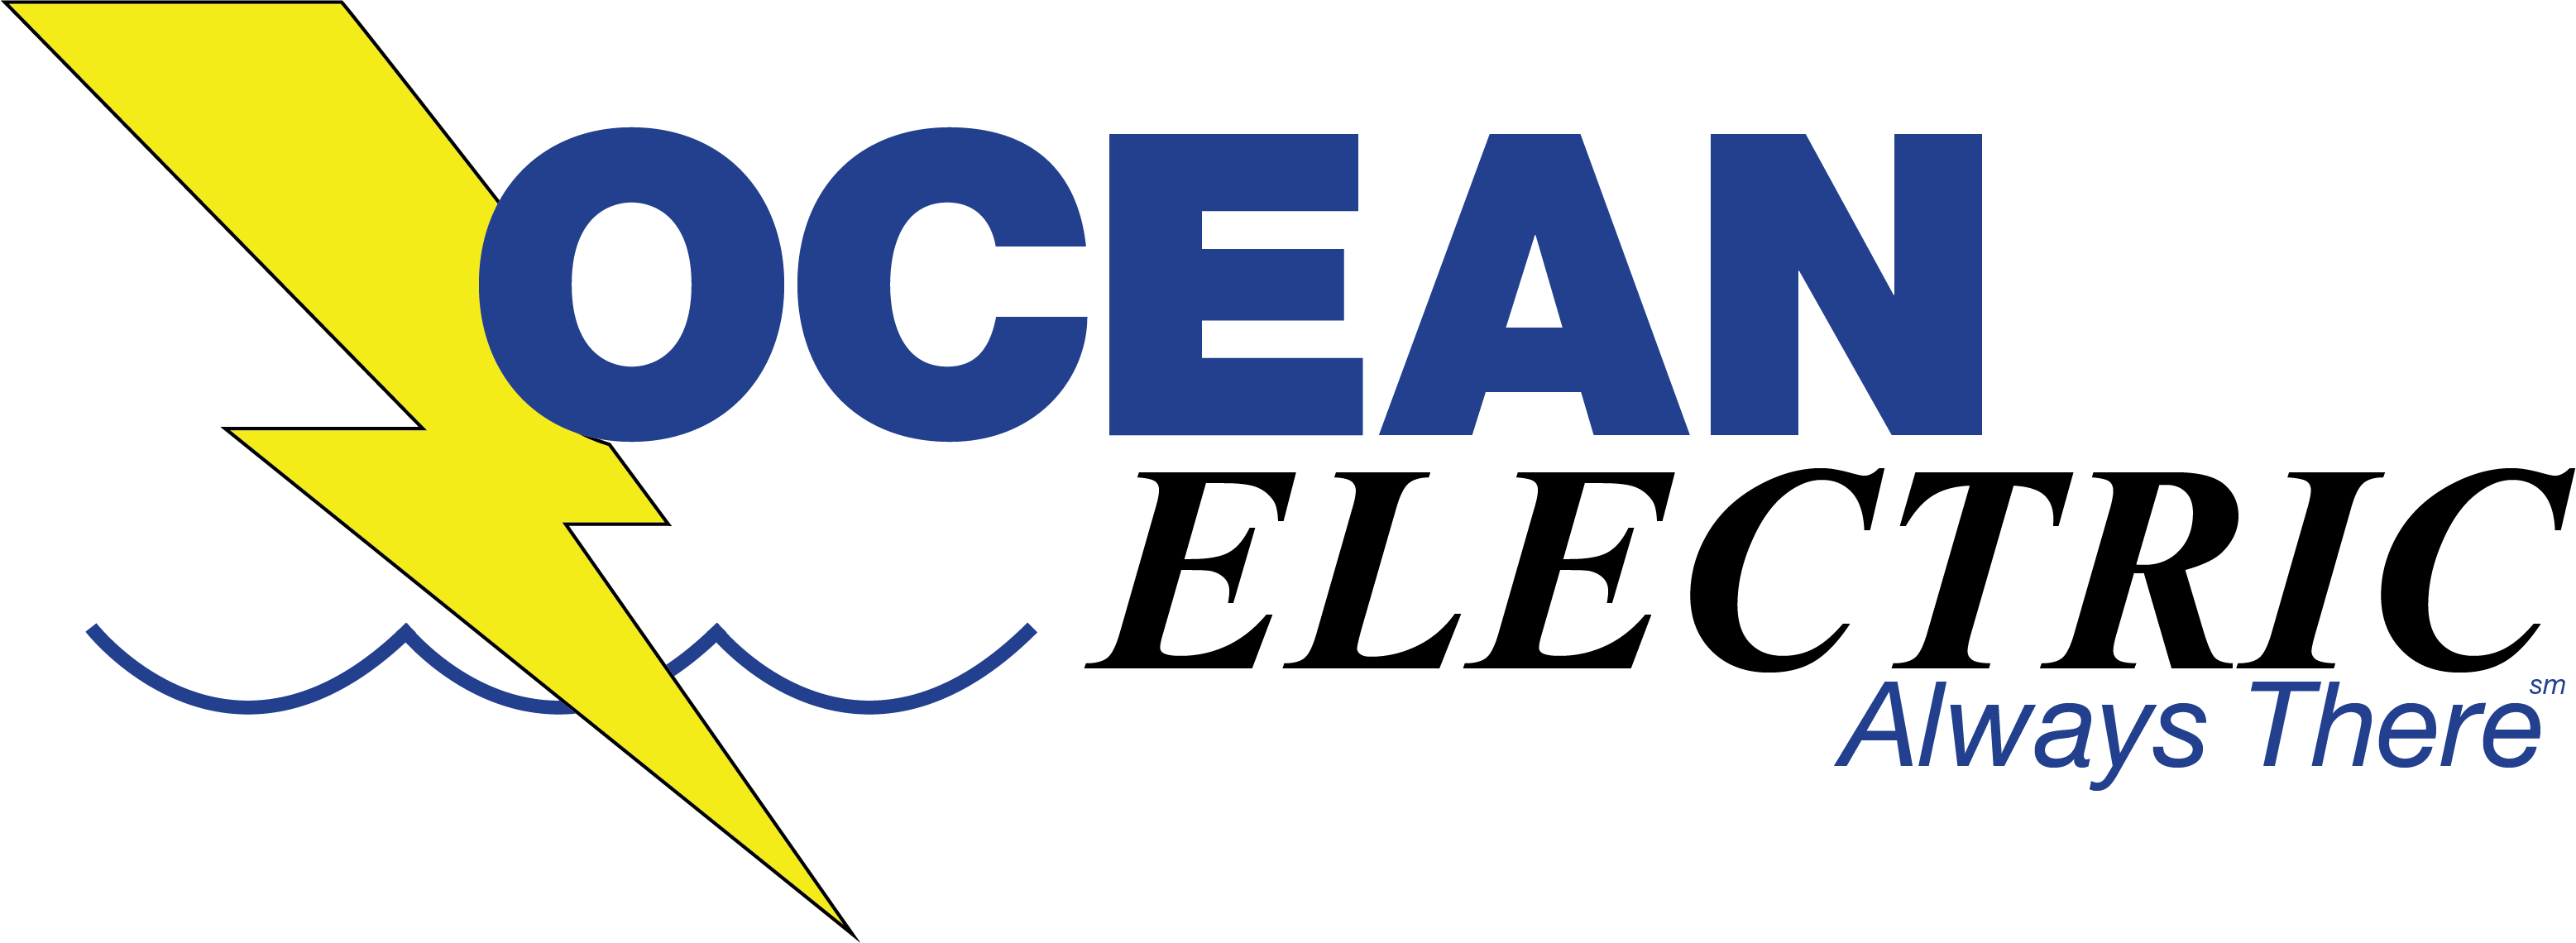 Ocean Electric Corp. Logo East End Electrical Contractors